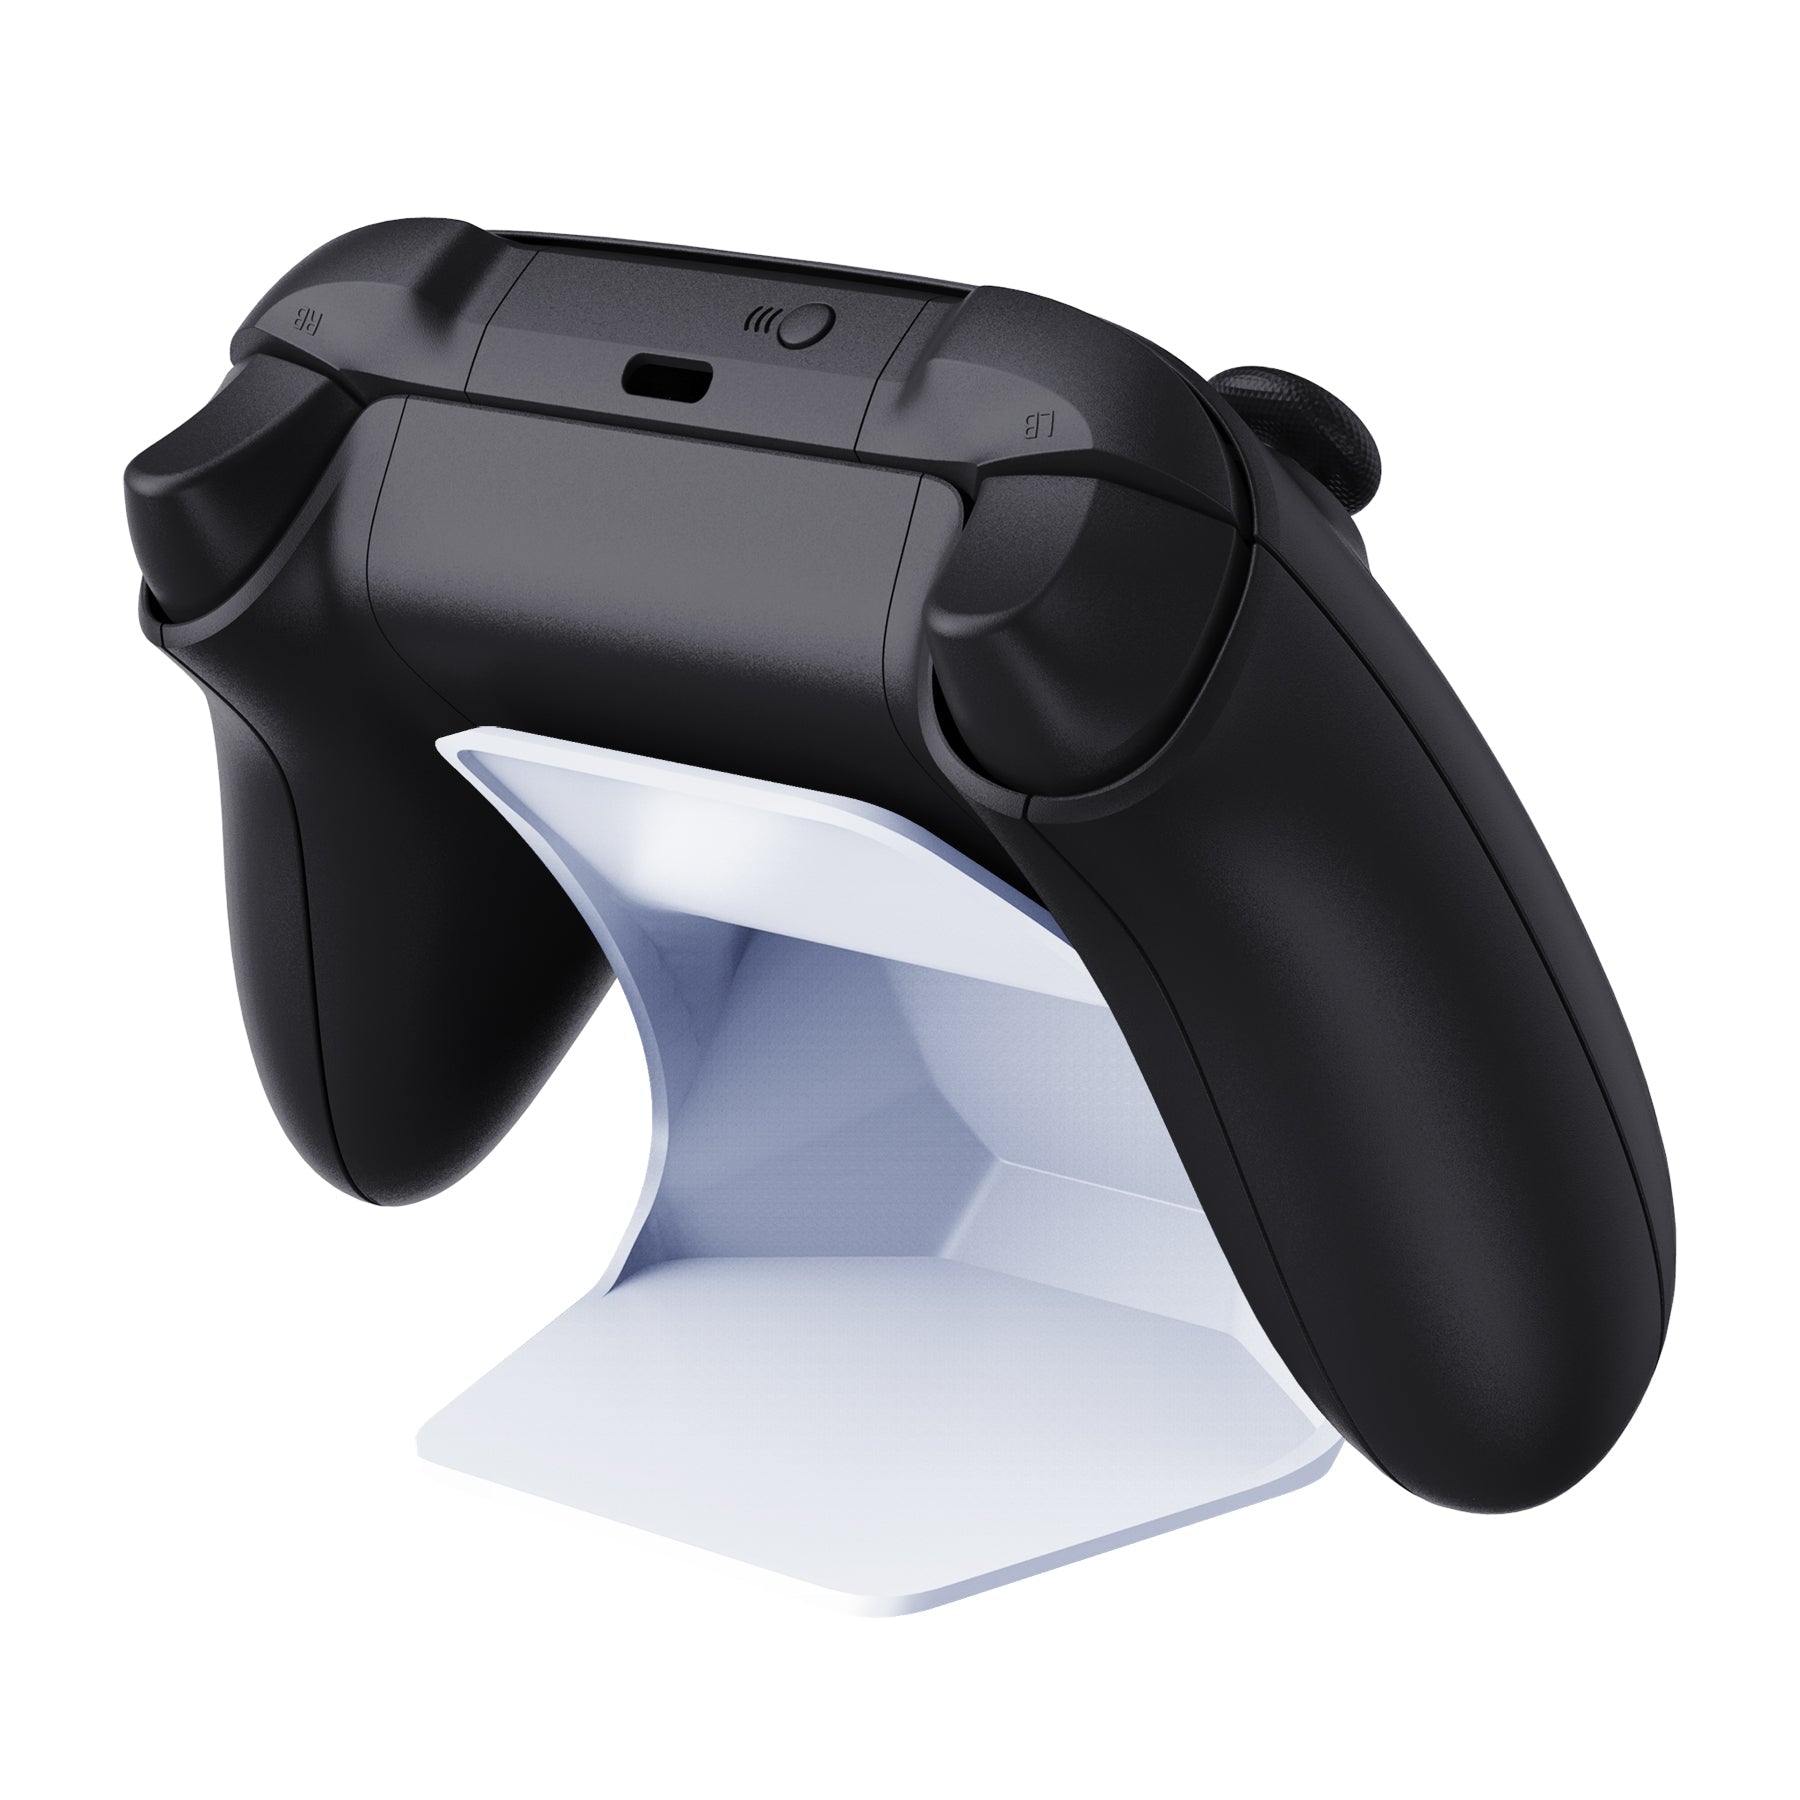 Cololight Gamepad Stand （Suitable for Mix/Mix Acid）